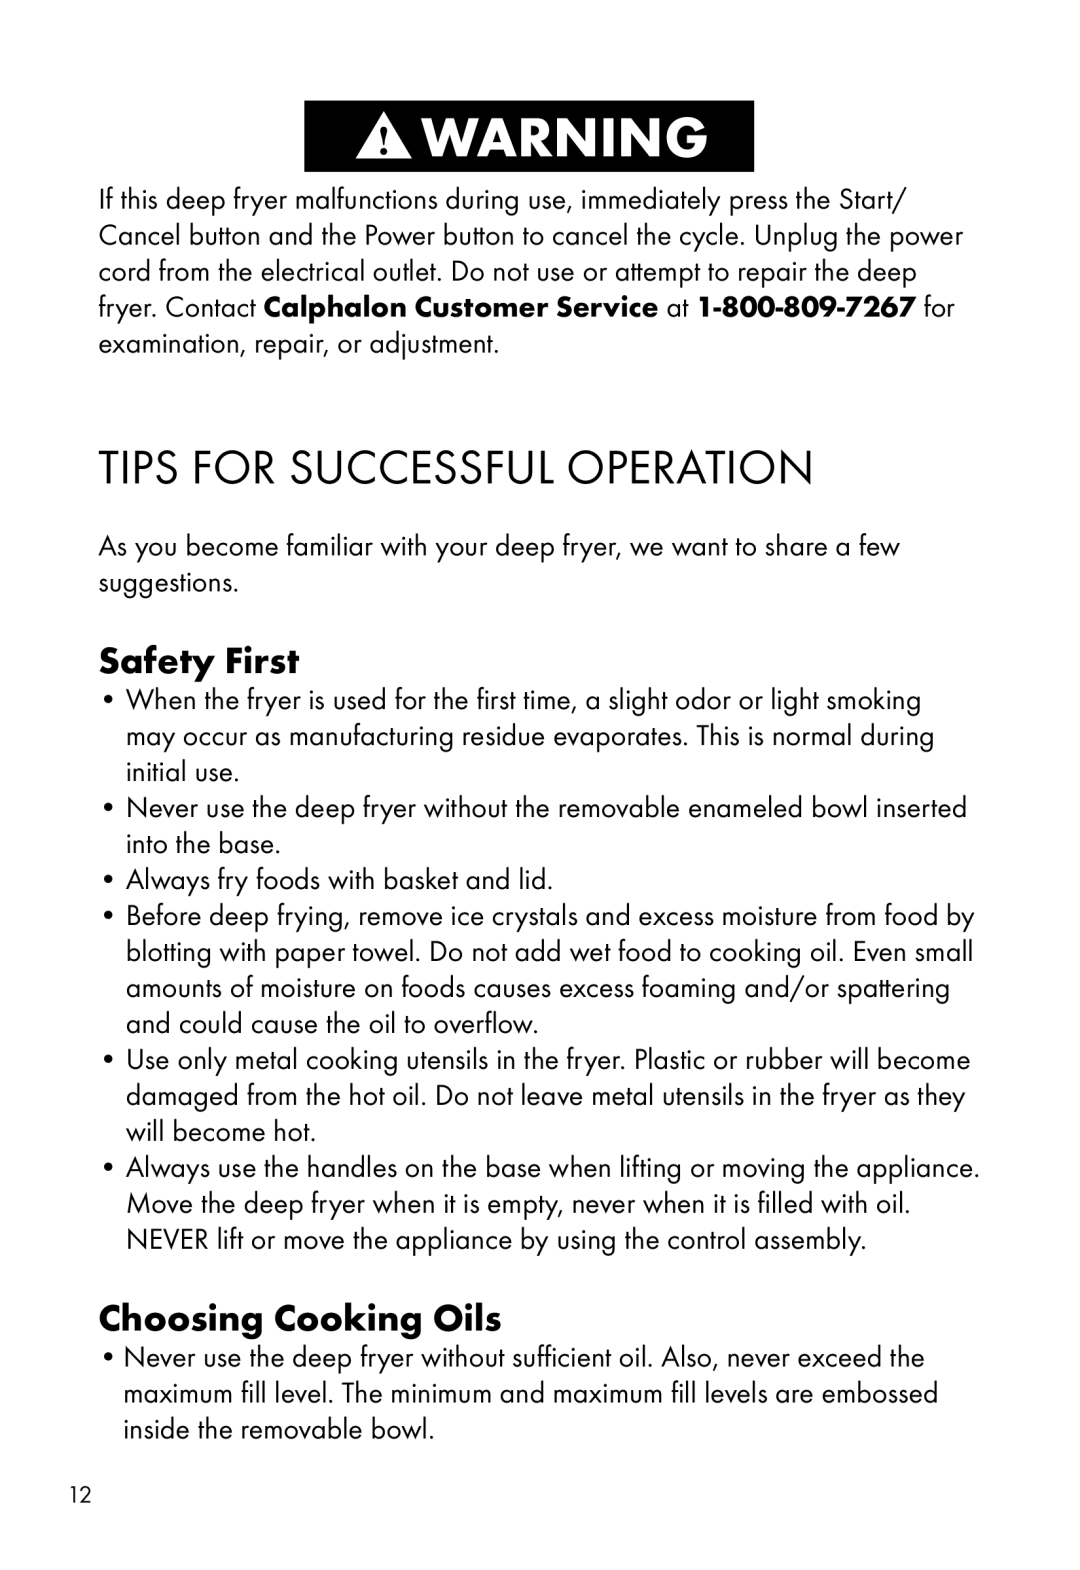 Calphalon HE380DF manual Tips For Successful Operation, Safety First, Choosing Cooking Oils 